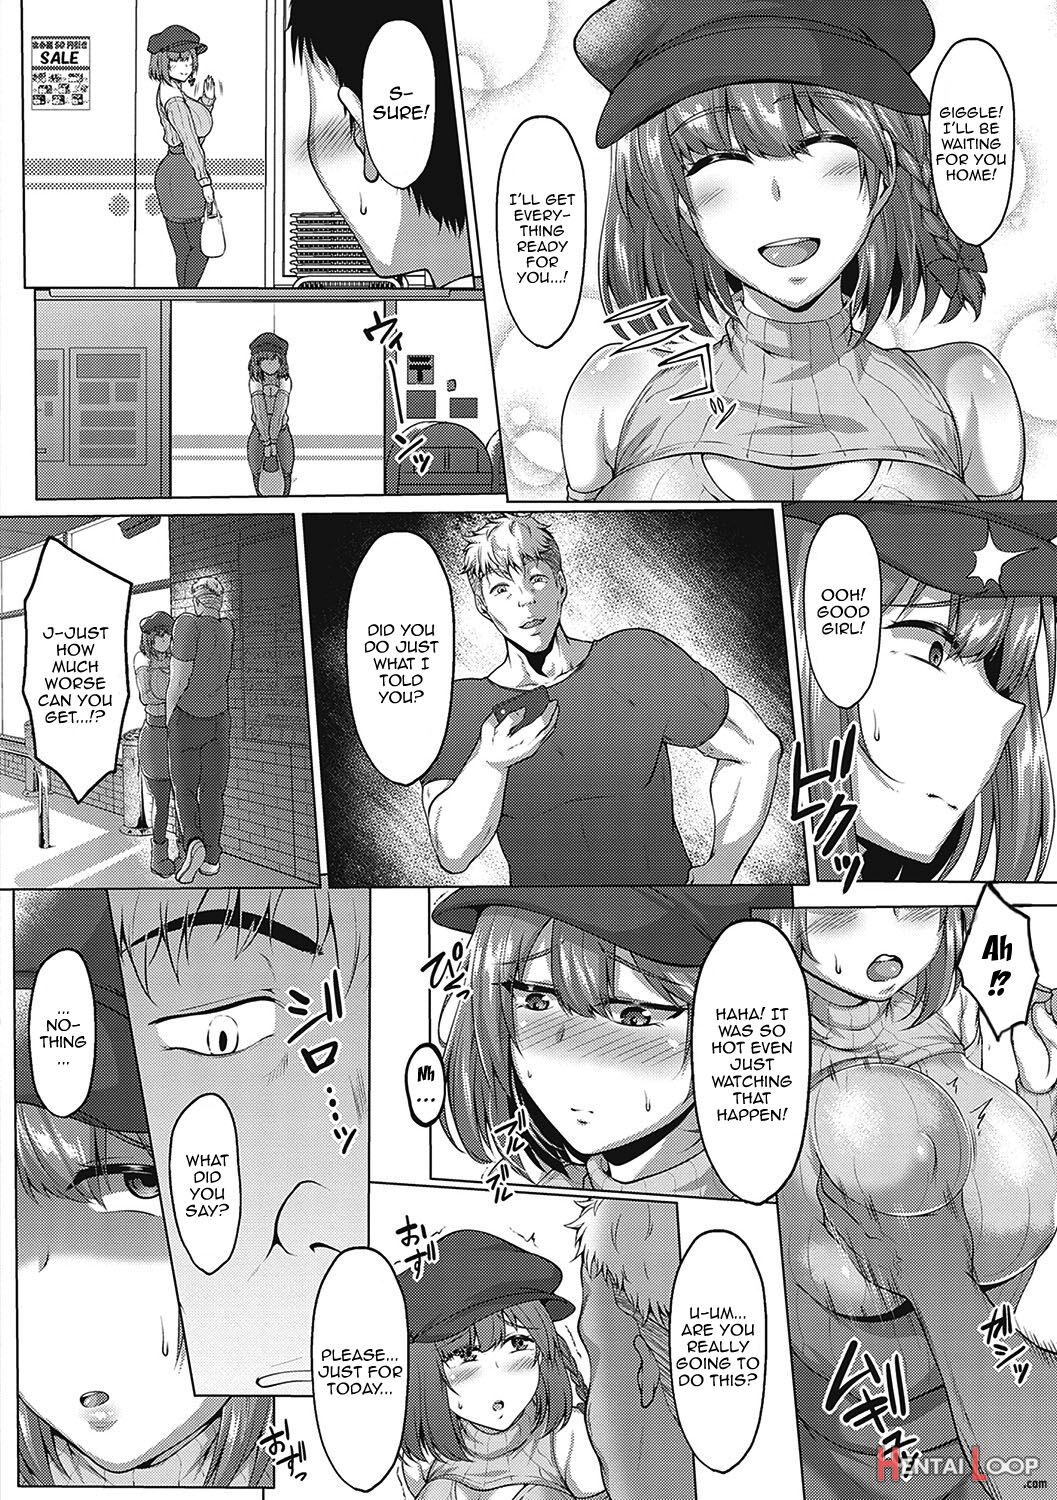 Thick Cock-loving Girls Ch. 1-6 page 21